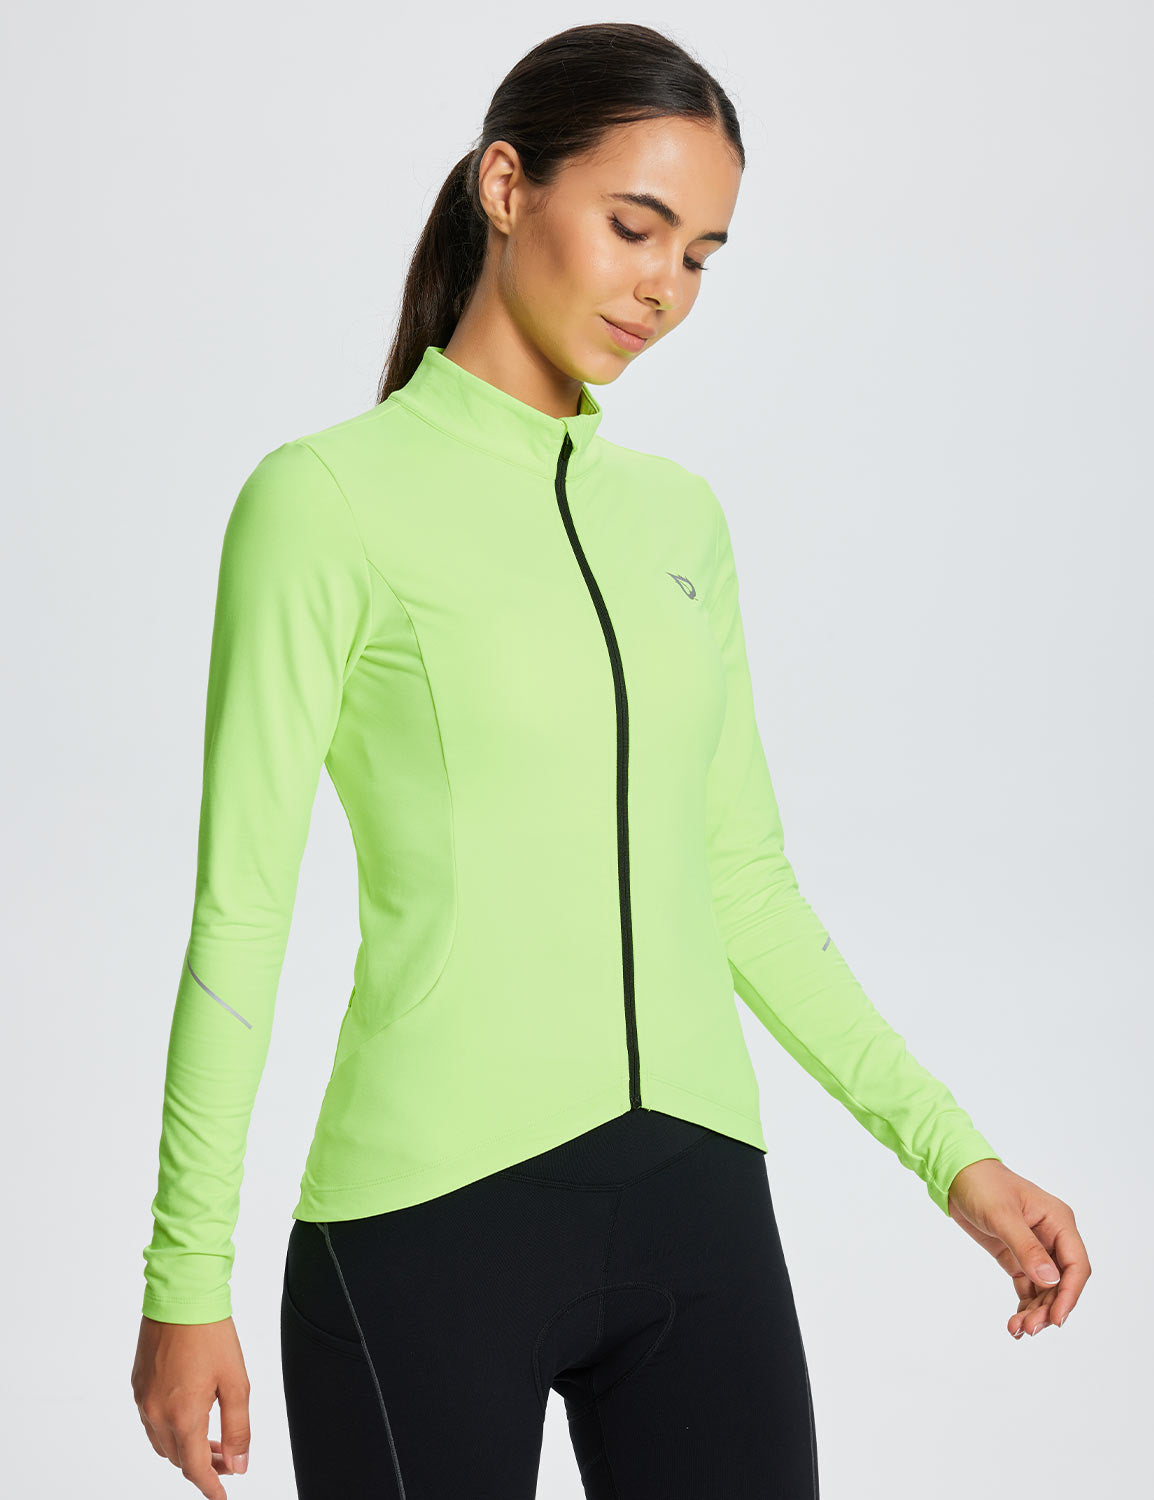 Baleaf Women's Laureate Thermal Pocketed Cycling Jersey dai042 Fluorescent Green Side